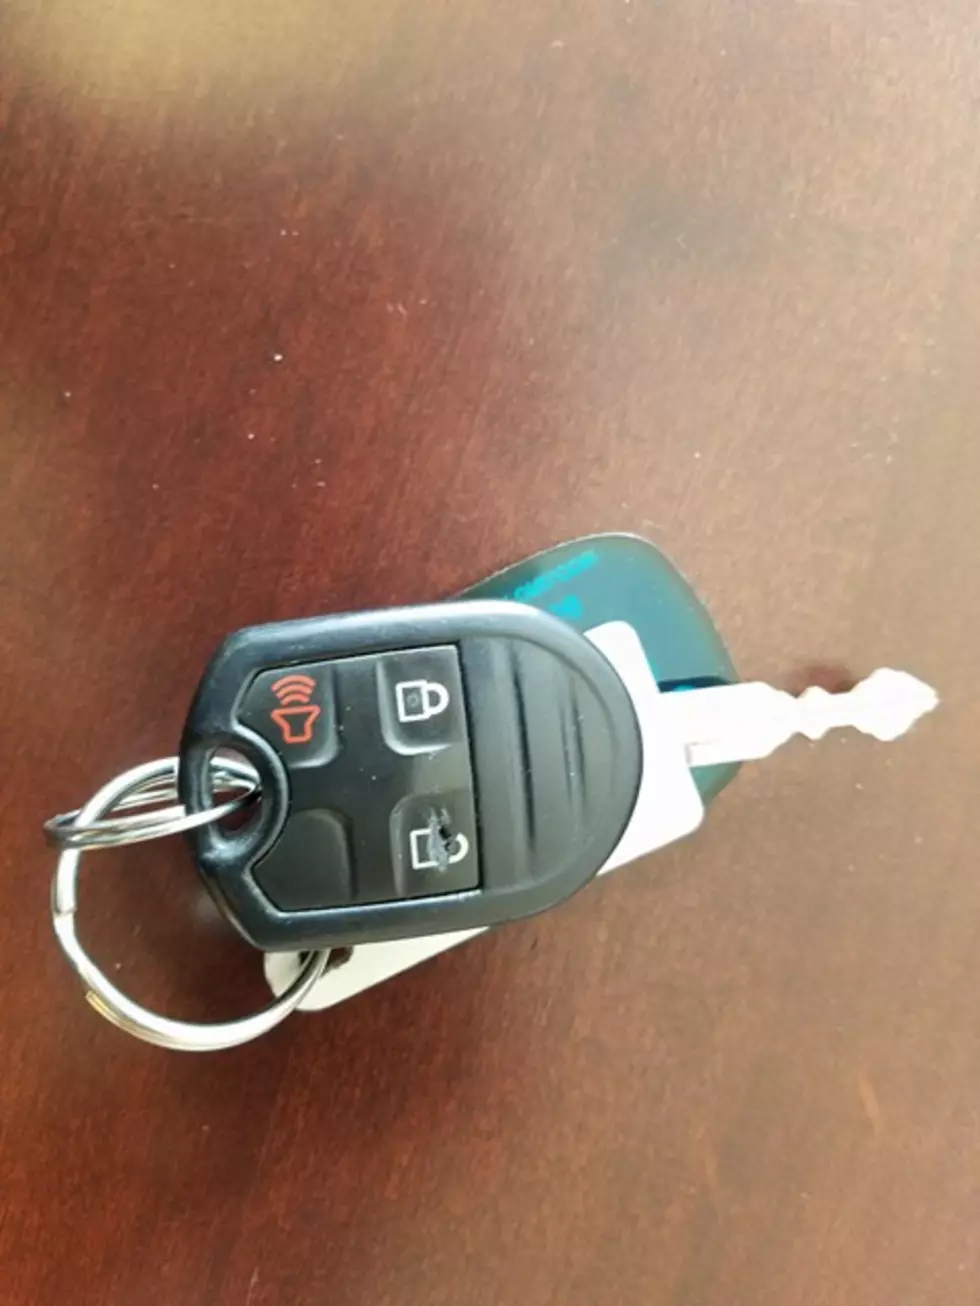 Cooper Needs Your Help With His Key Fob